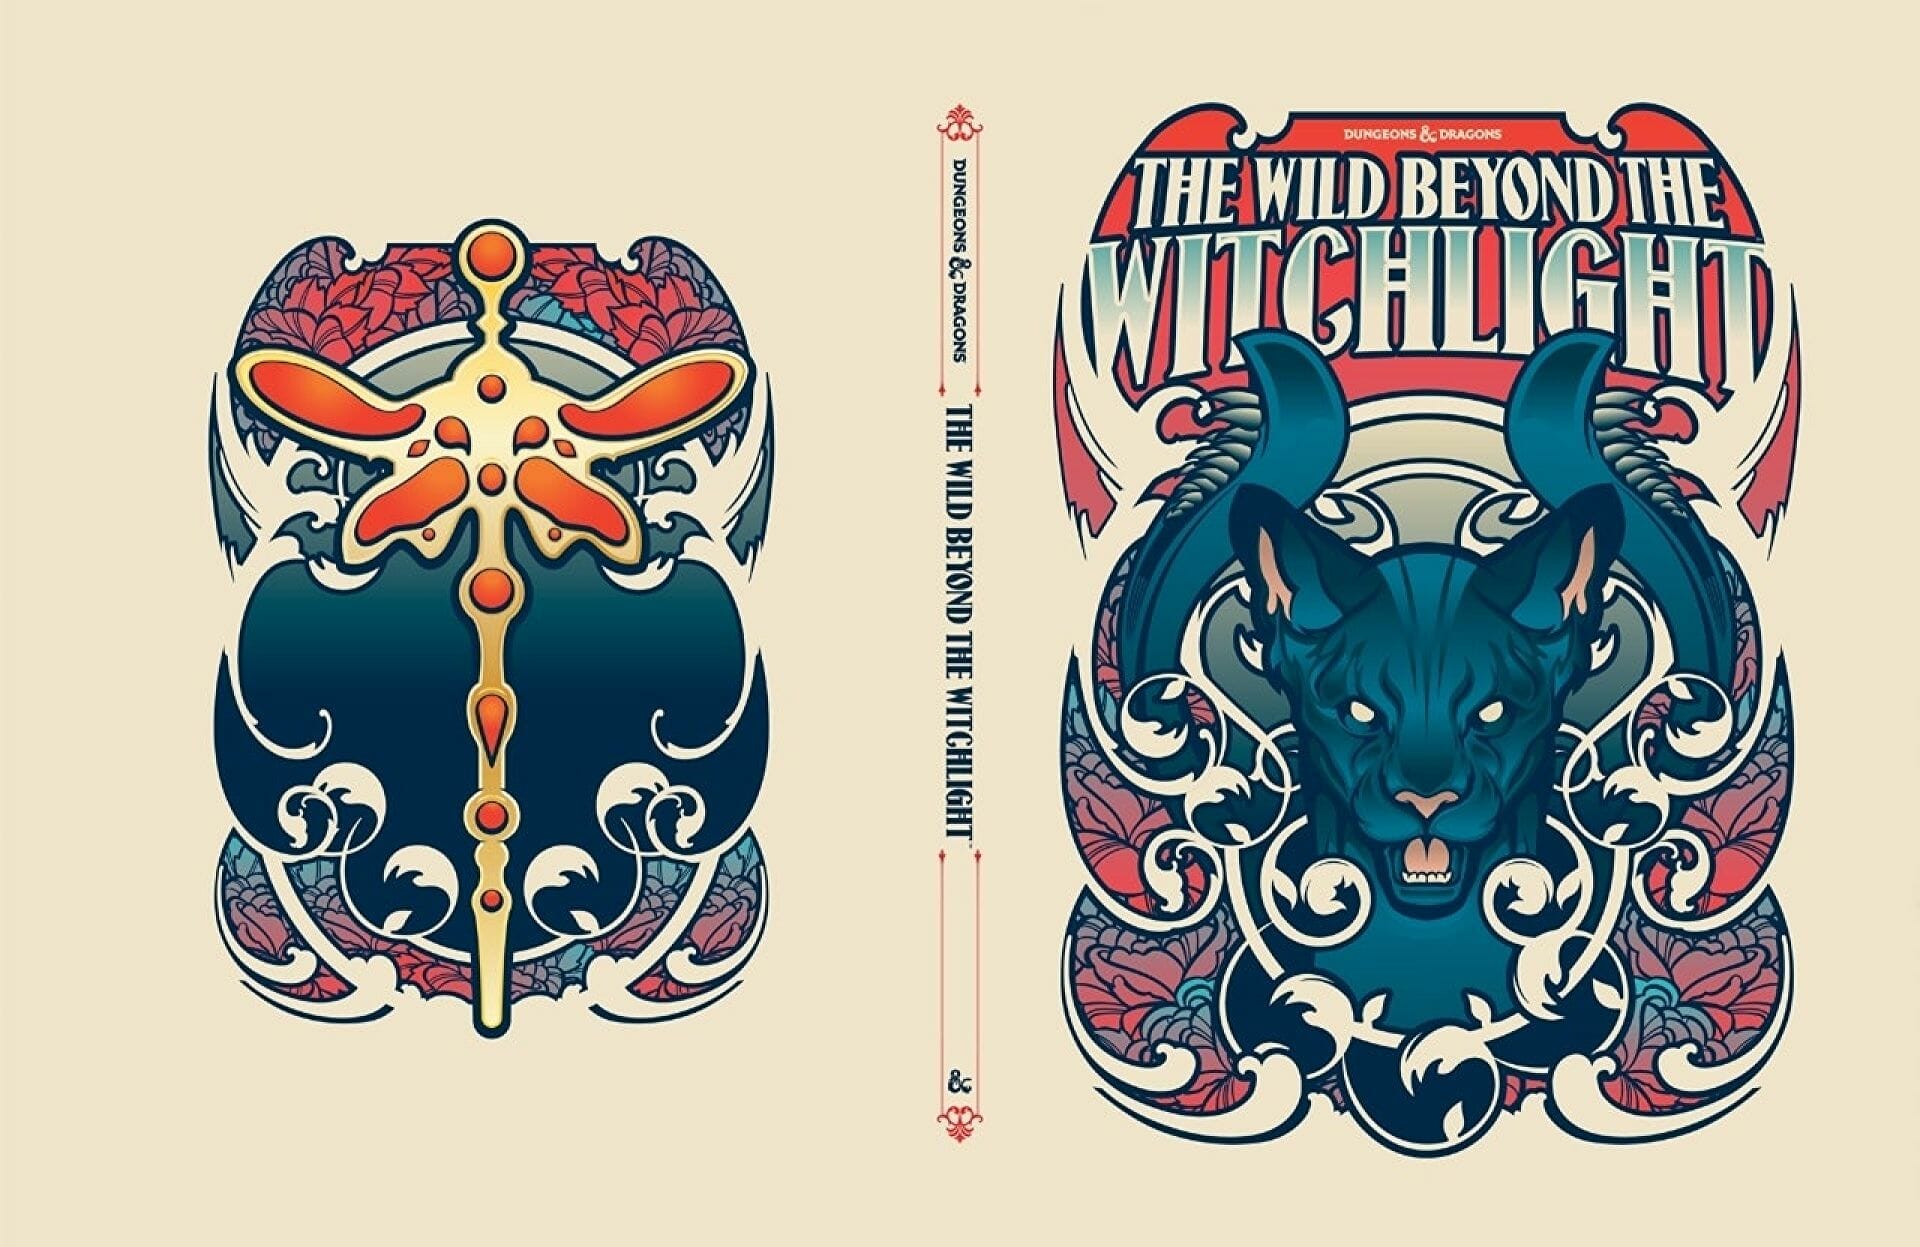 The Wild Beyond The Witchlight: A Feywild Adventure variant cover